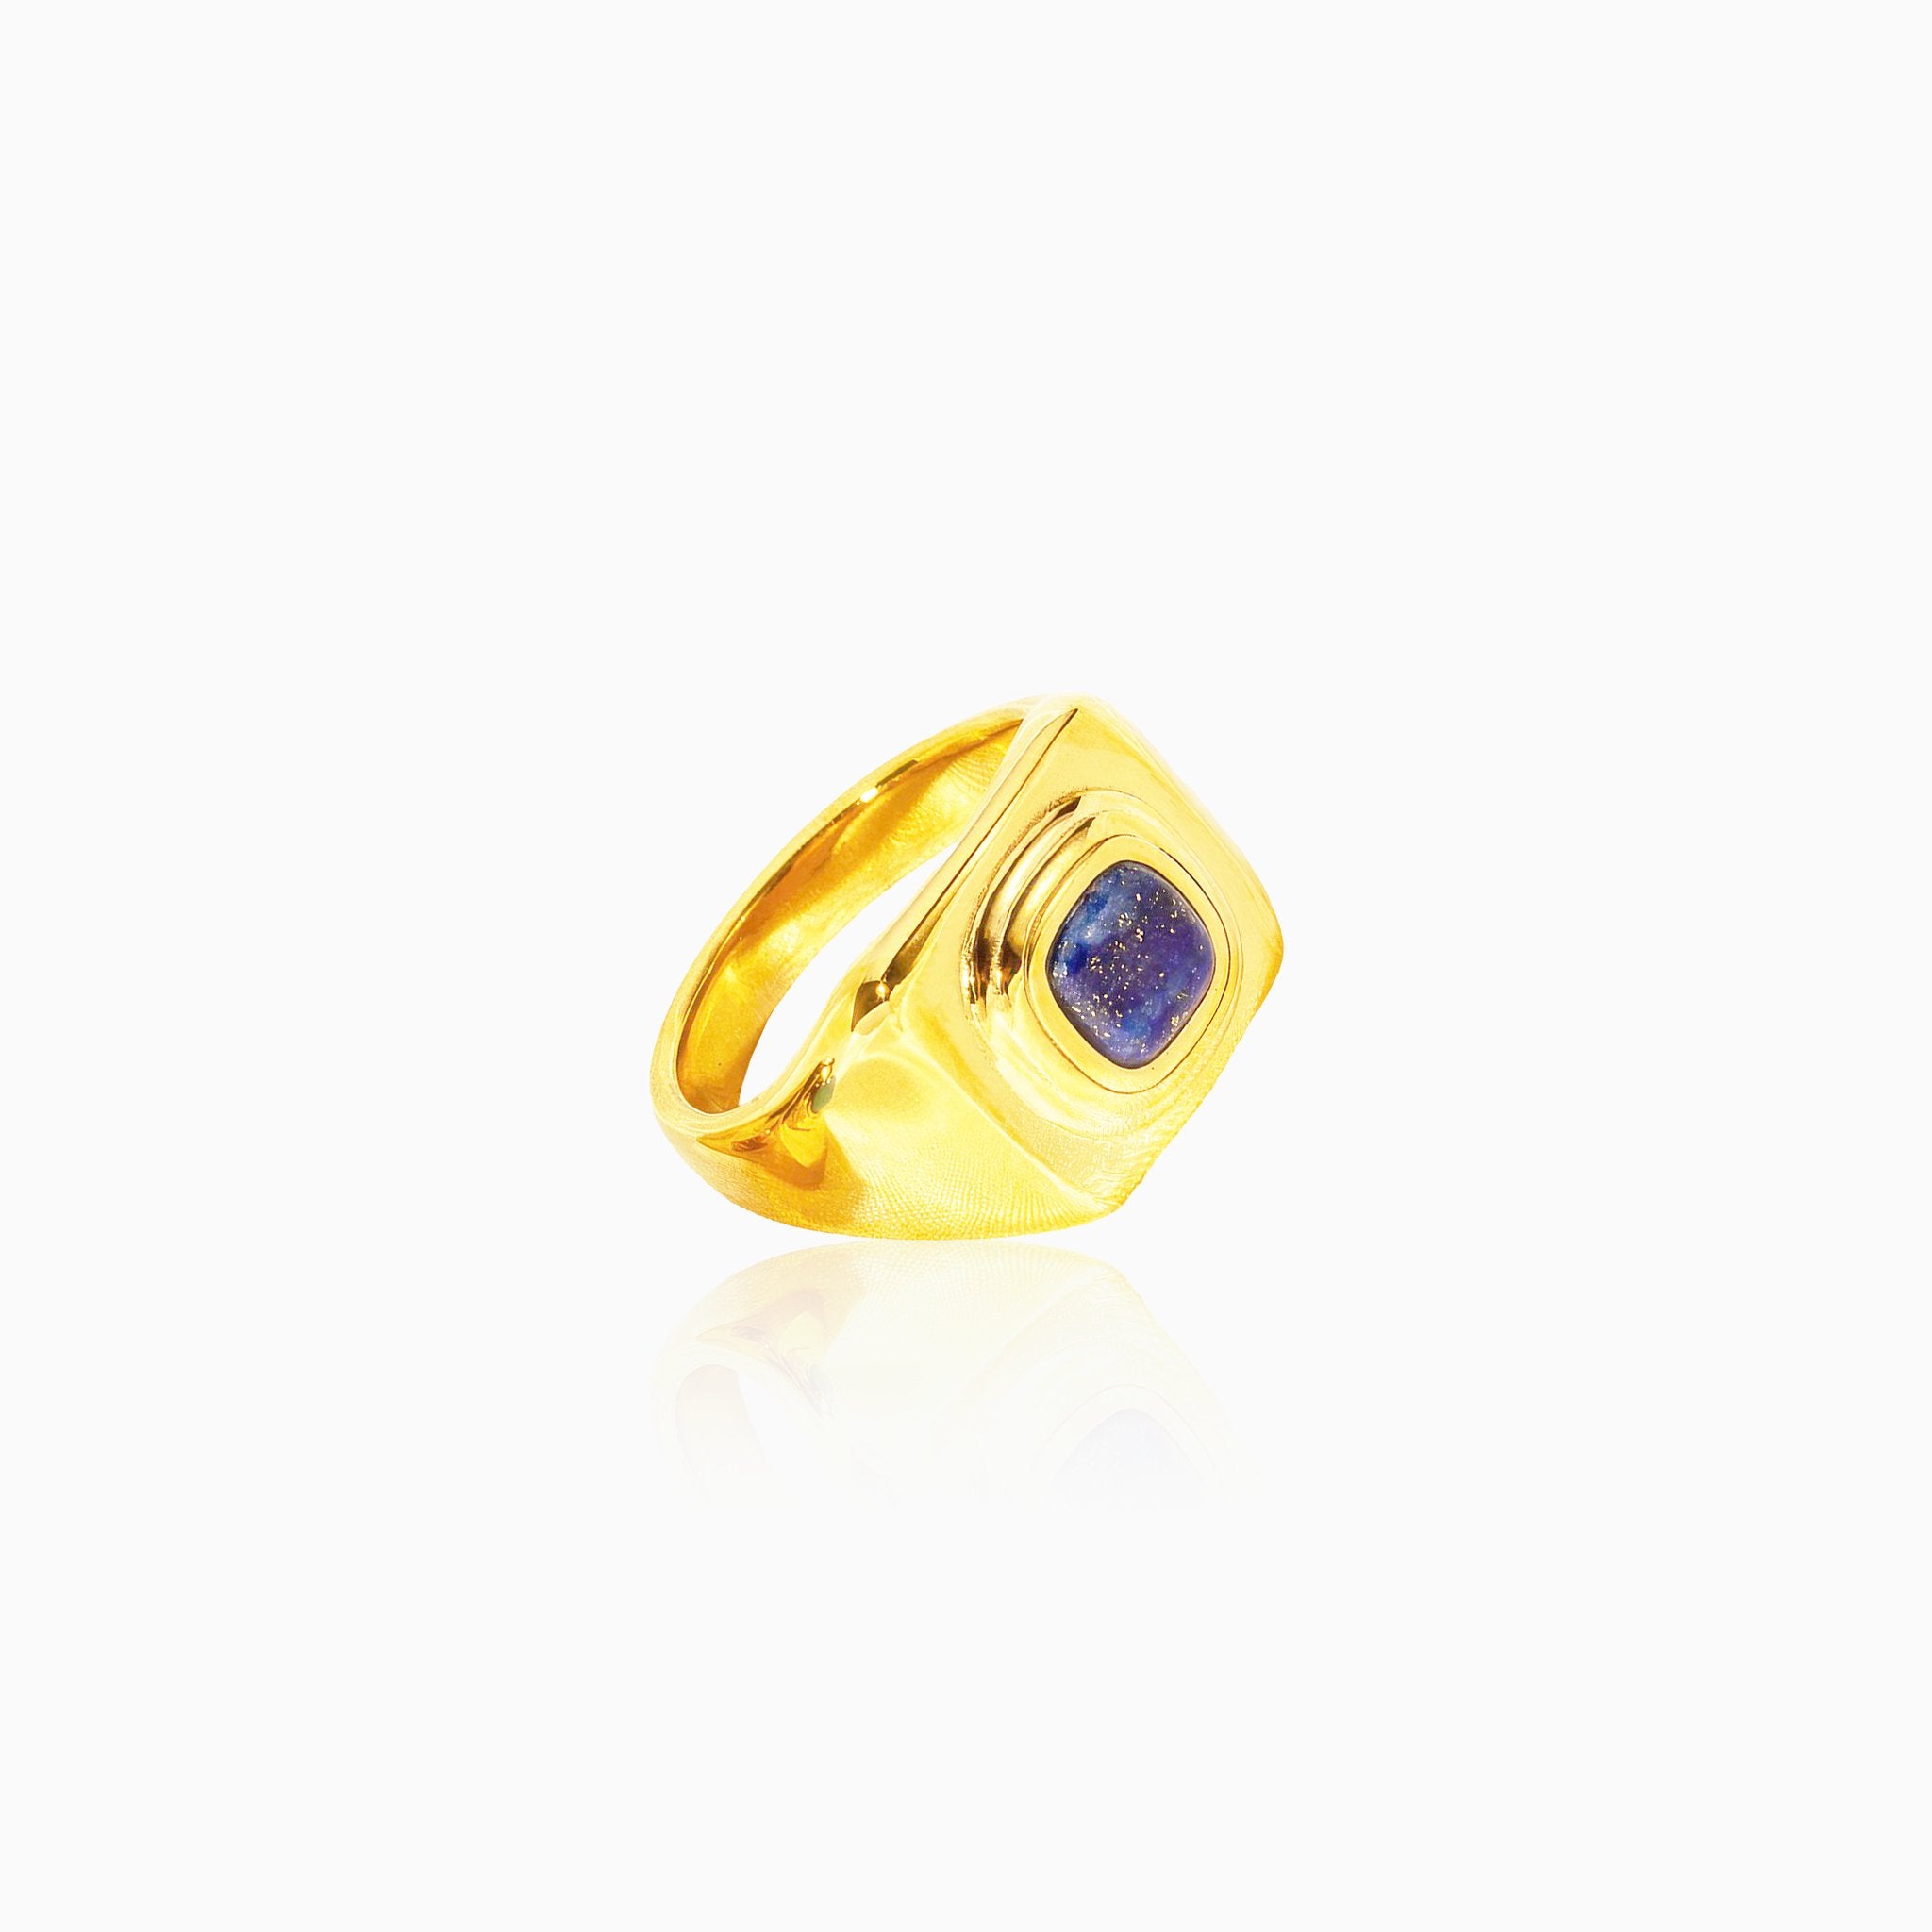 Vintage Lapis Lazuli Ring - Nobbier - Ring - 18K Gold And Titanium PVD Coated Jewelry